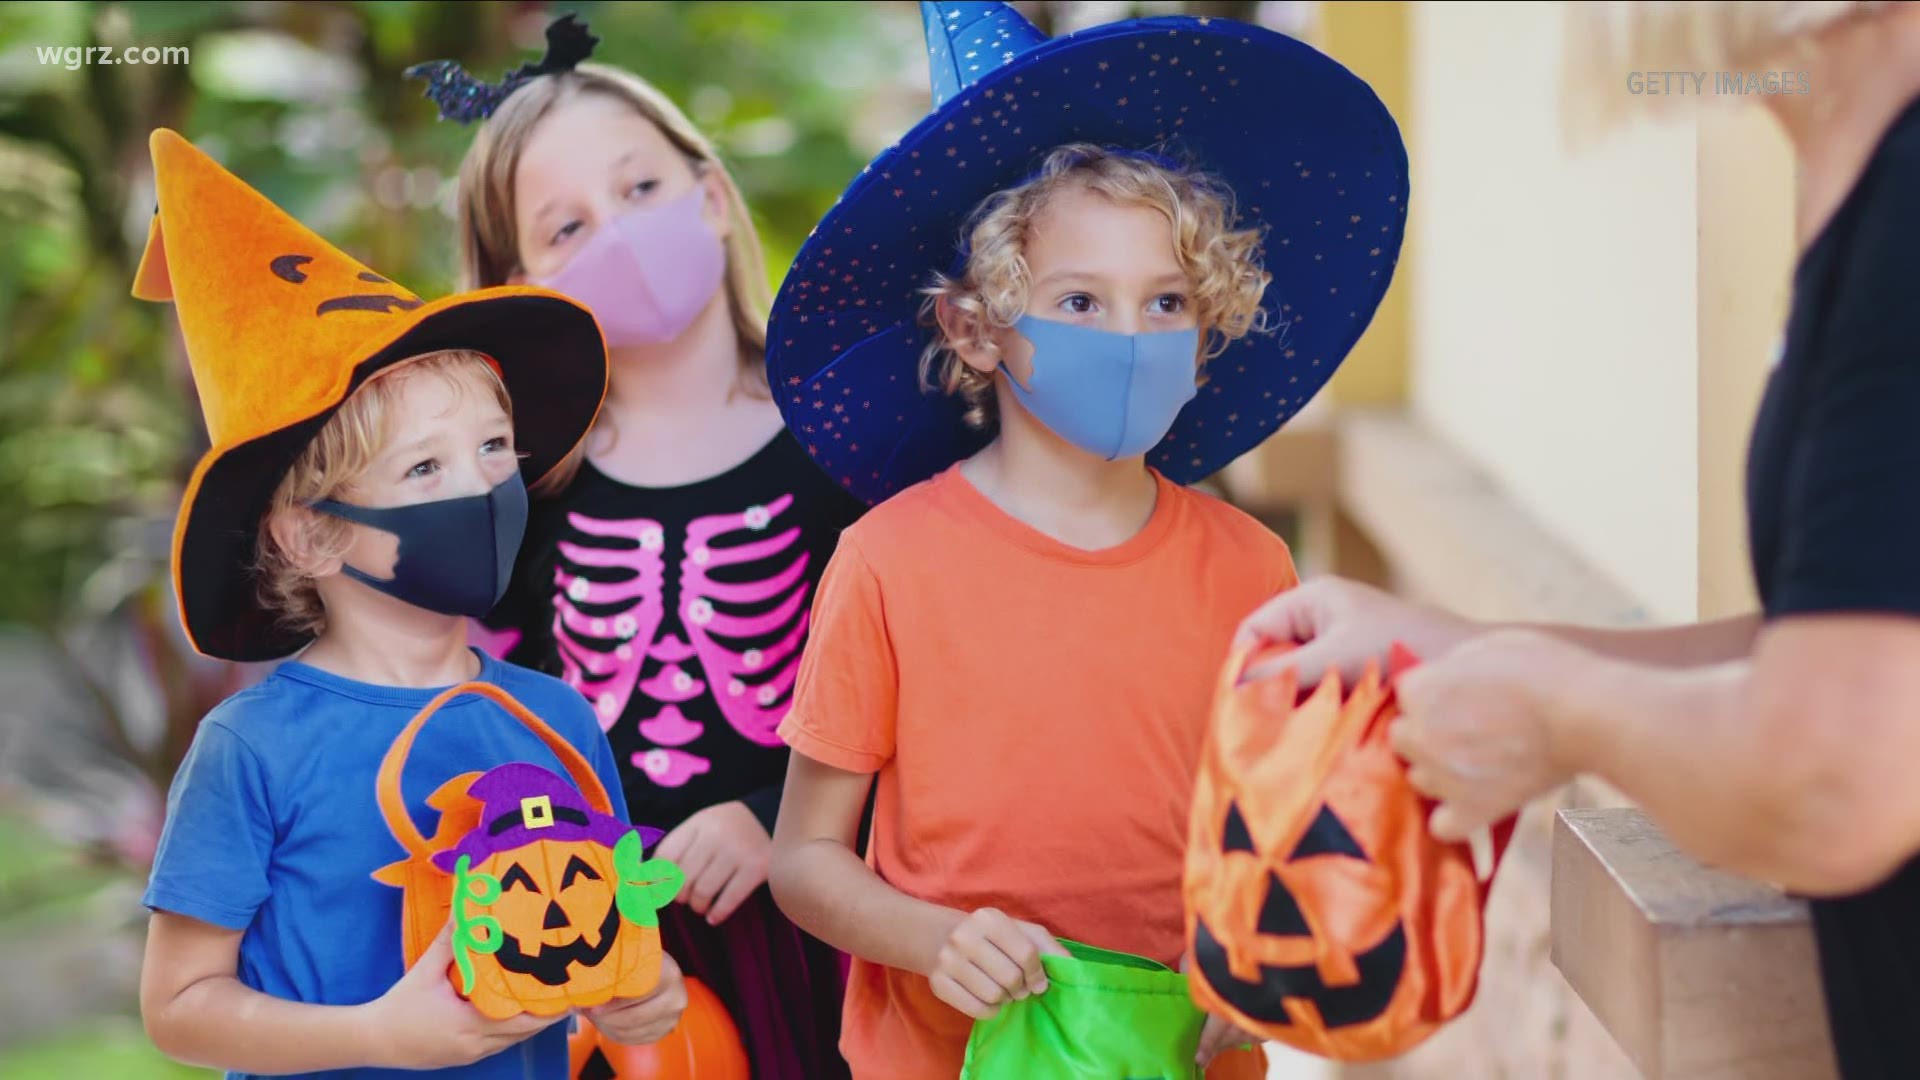 we look at ways to have a safe Halloween